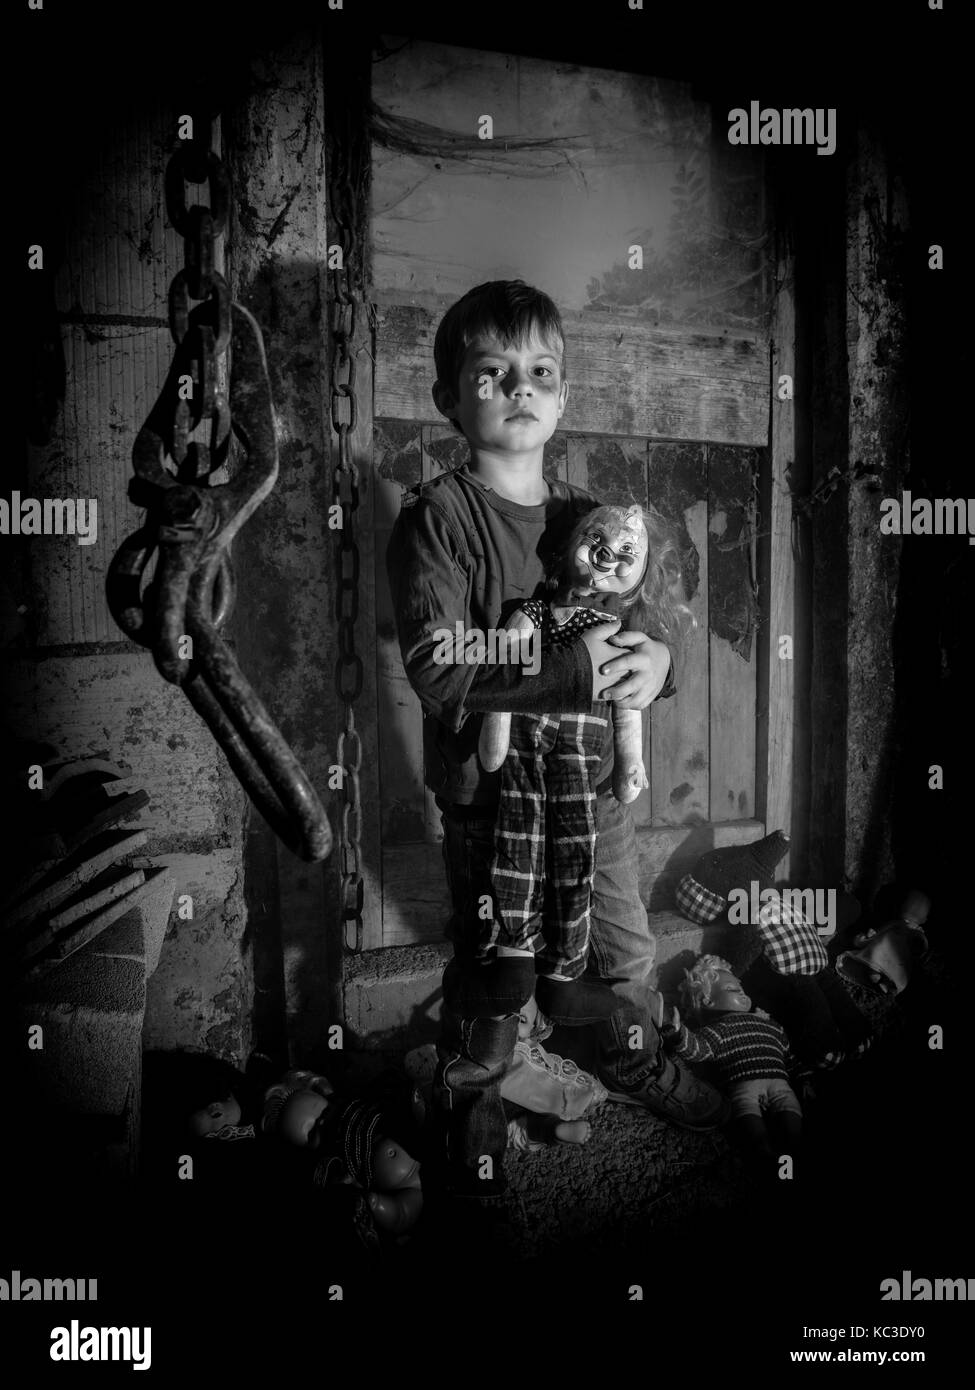 Photo of a creepy young boy holding an old clown doll in an old barn covered in spiderwebs and dust. Stock Photo